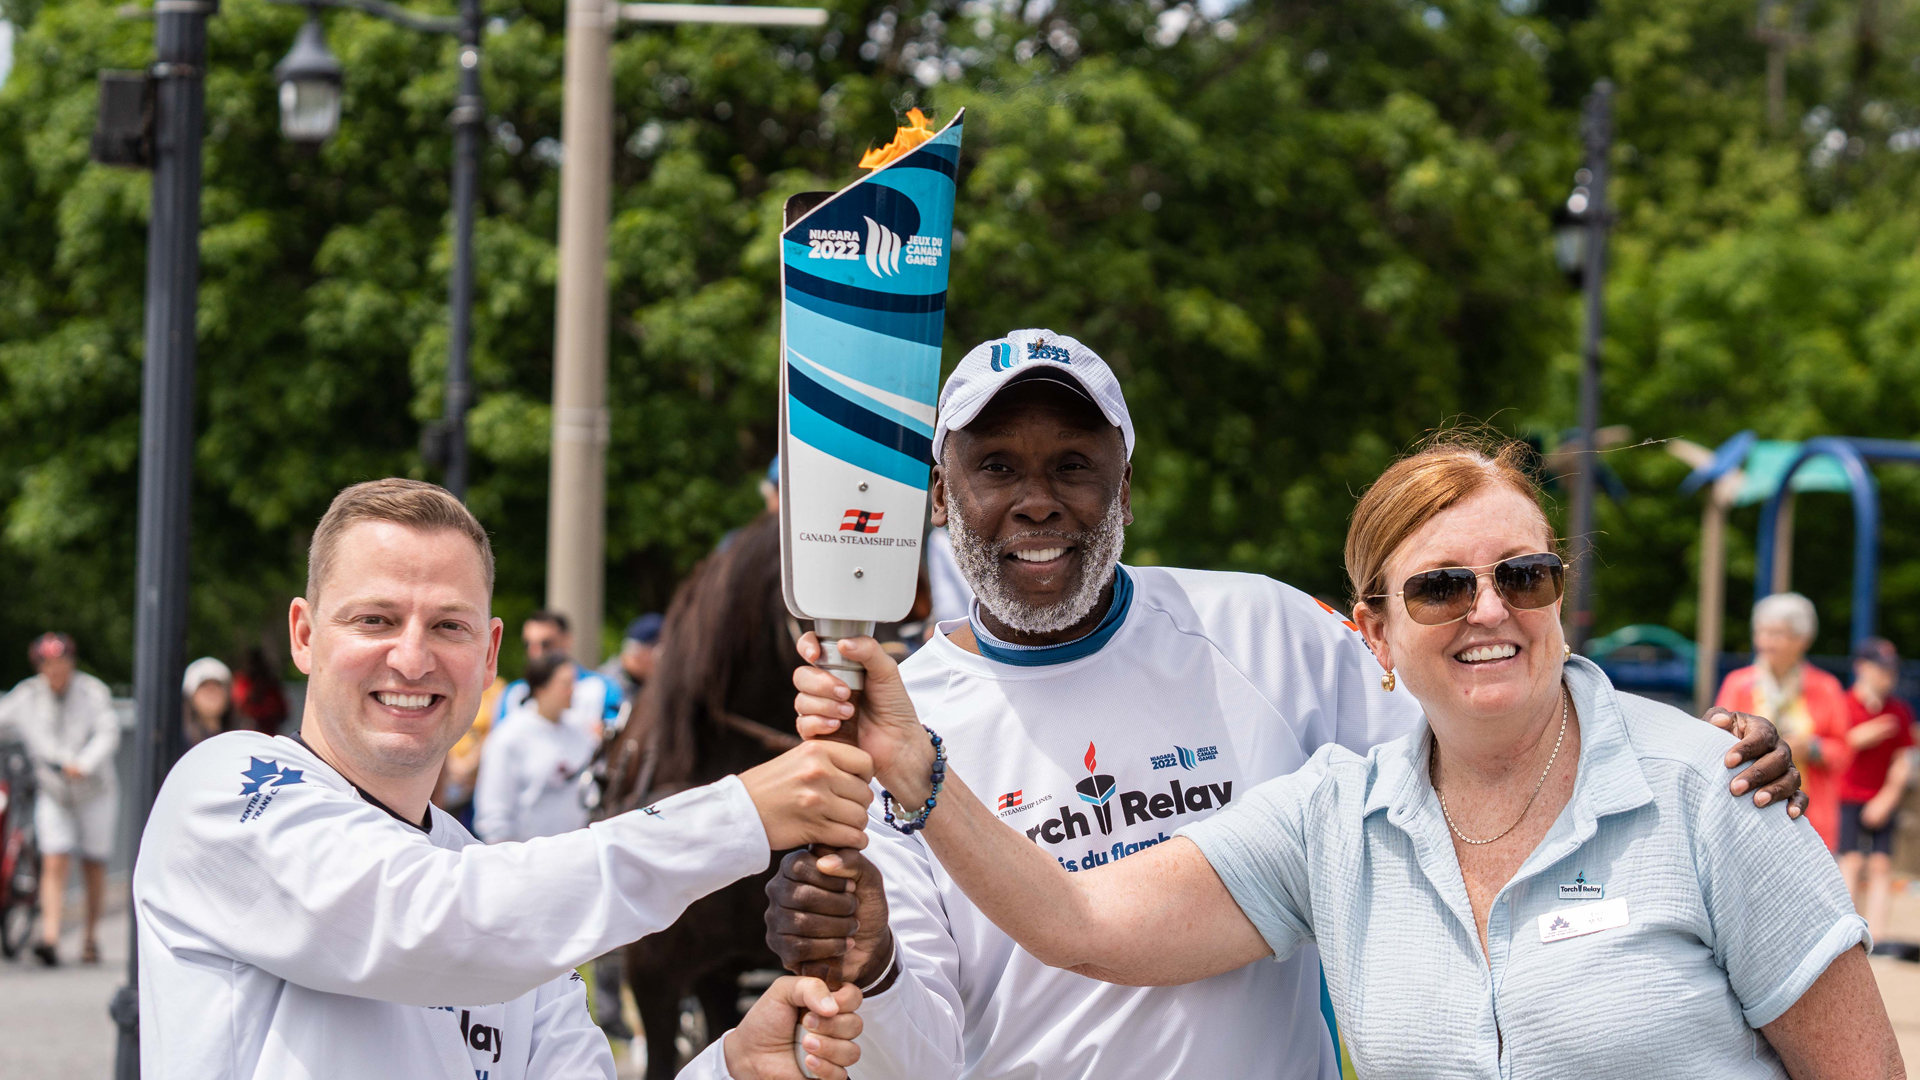 Eleanor McMahon, Bruny Surin, and Mathieu Traversy holding the torch at the Niagara 2022 Canada Summer Games Torch Relay